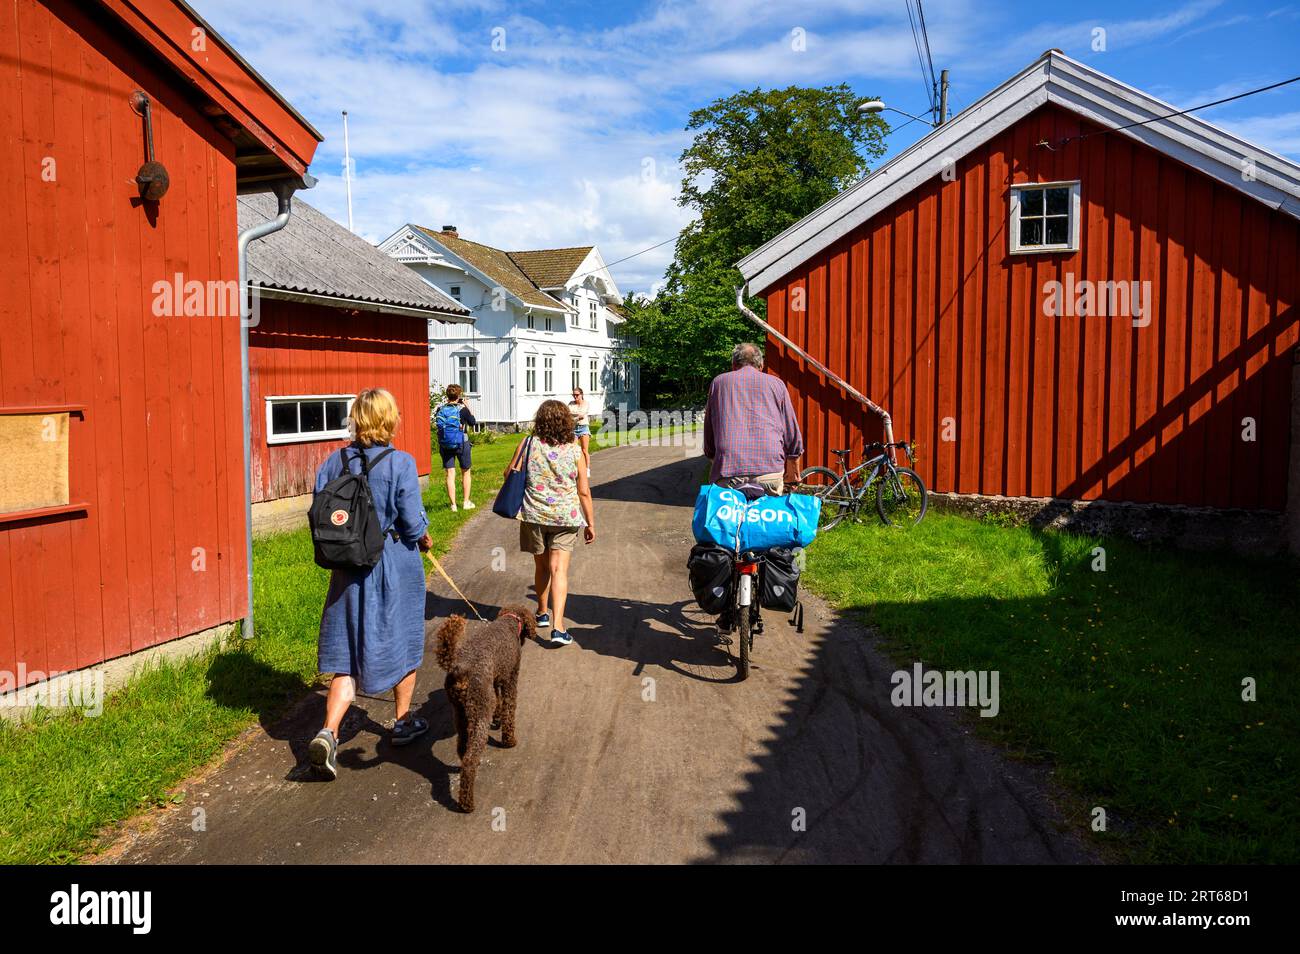 Holidaymakers walk and cycle on the track going through the main farm buildings on Jomfruland island a bright, sunny summer's day, Telemark, Norway. Stock Photo